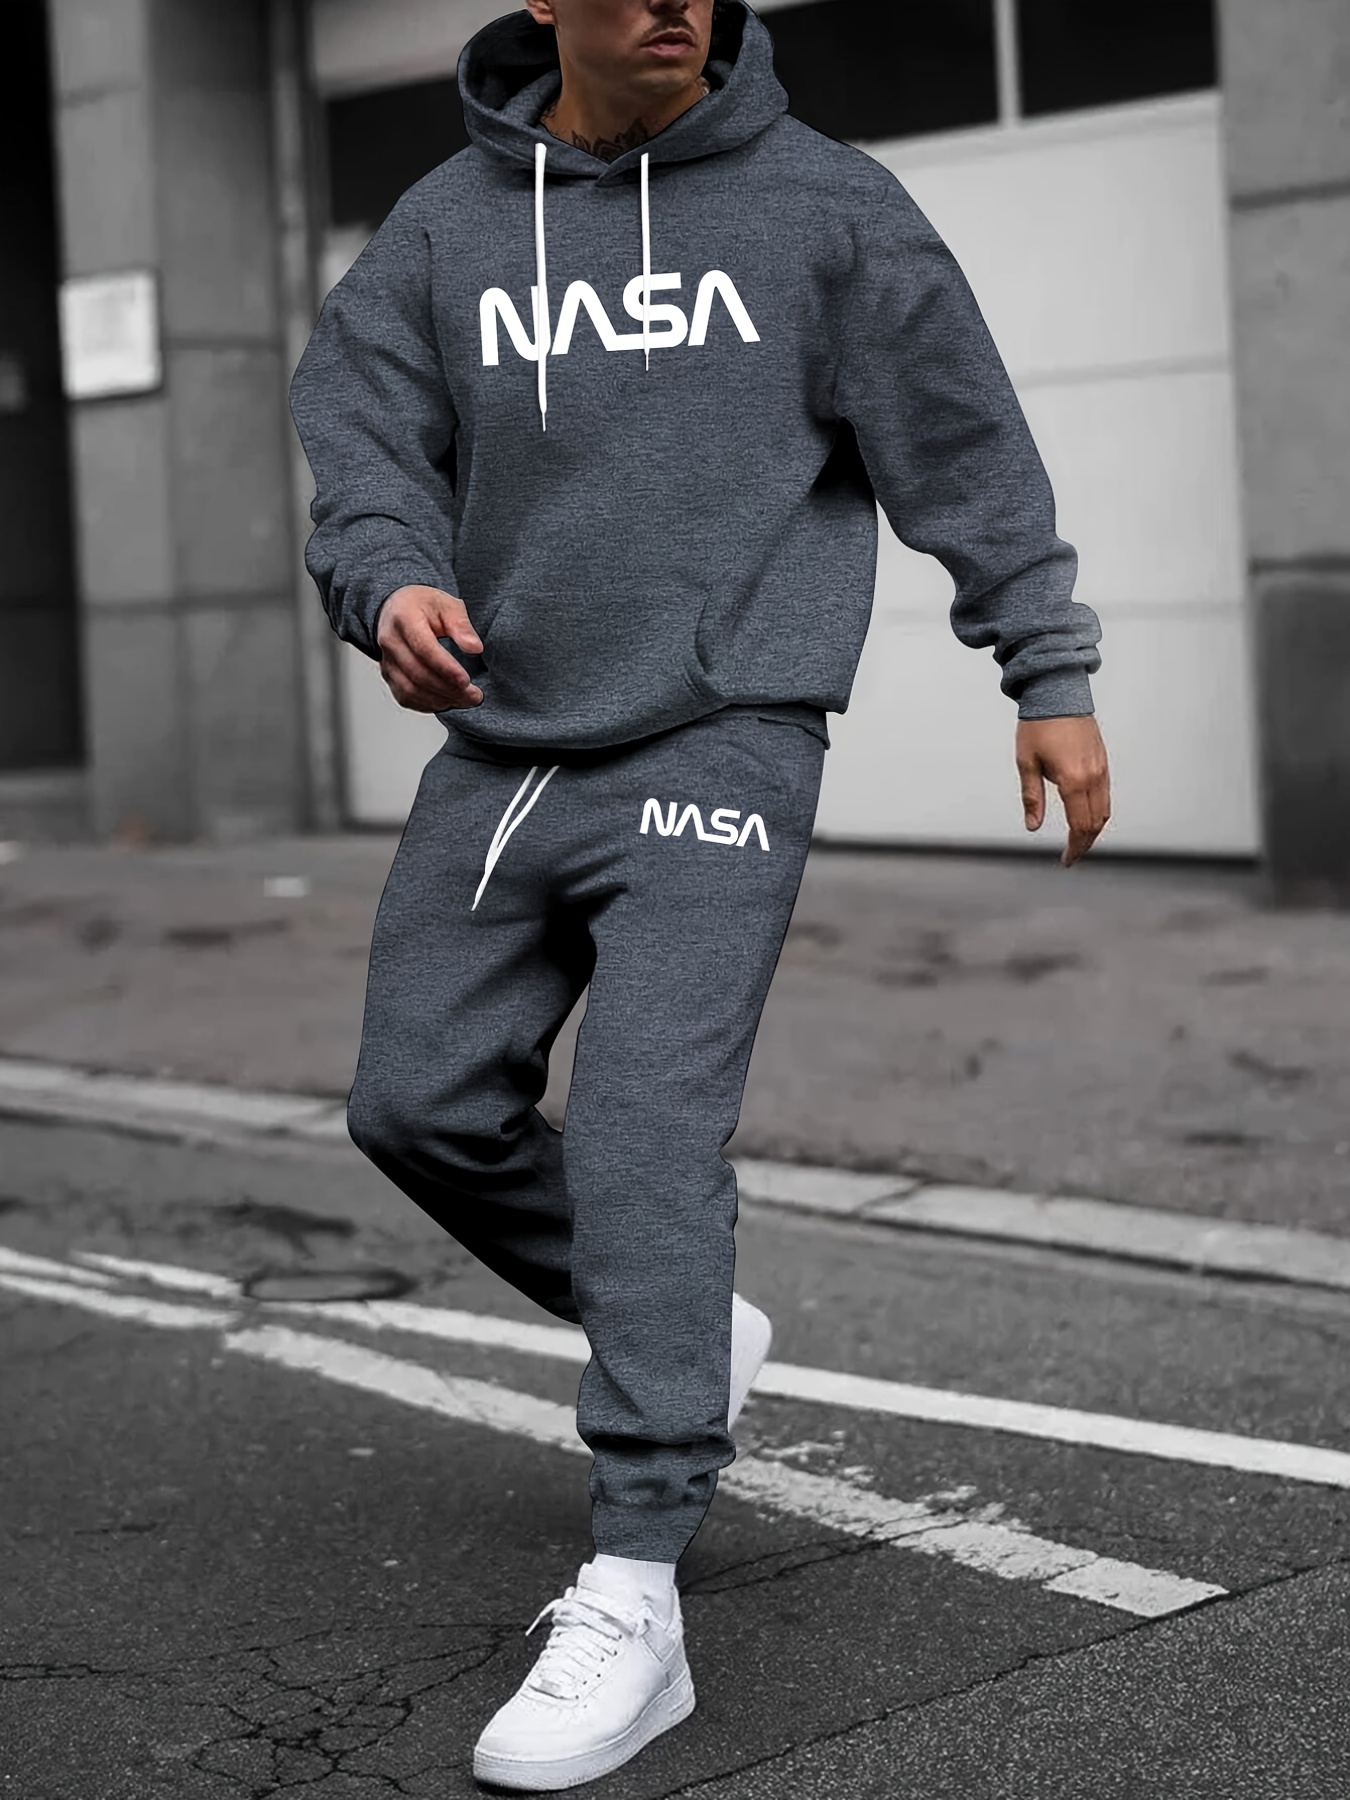 Mens street wear  Cool outfits for men, Nike hoodie outfit, Pants